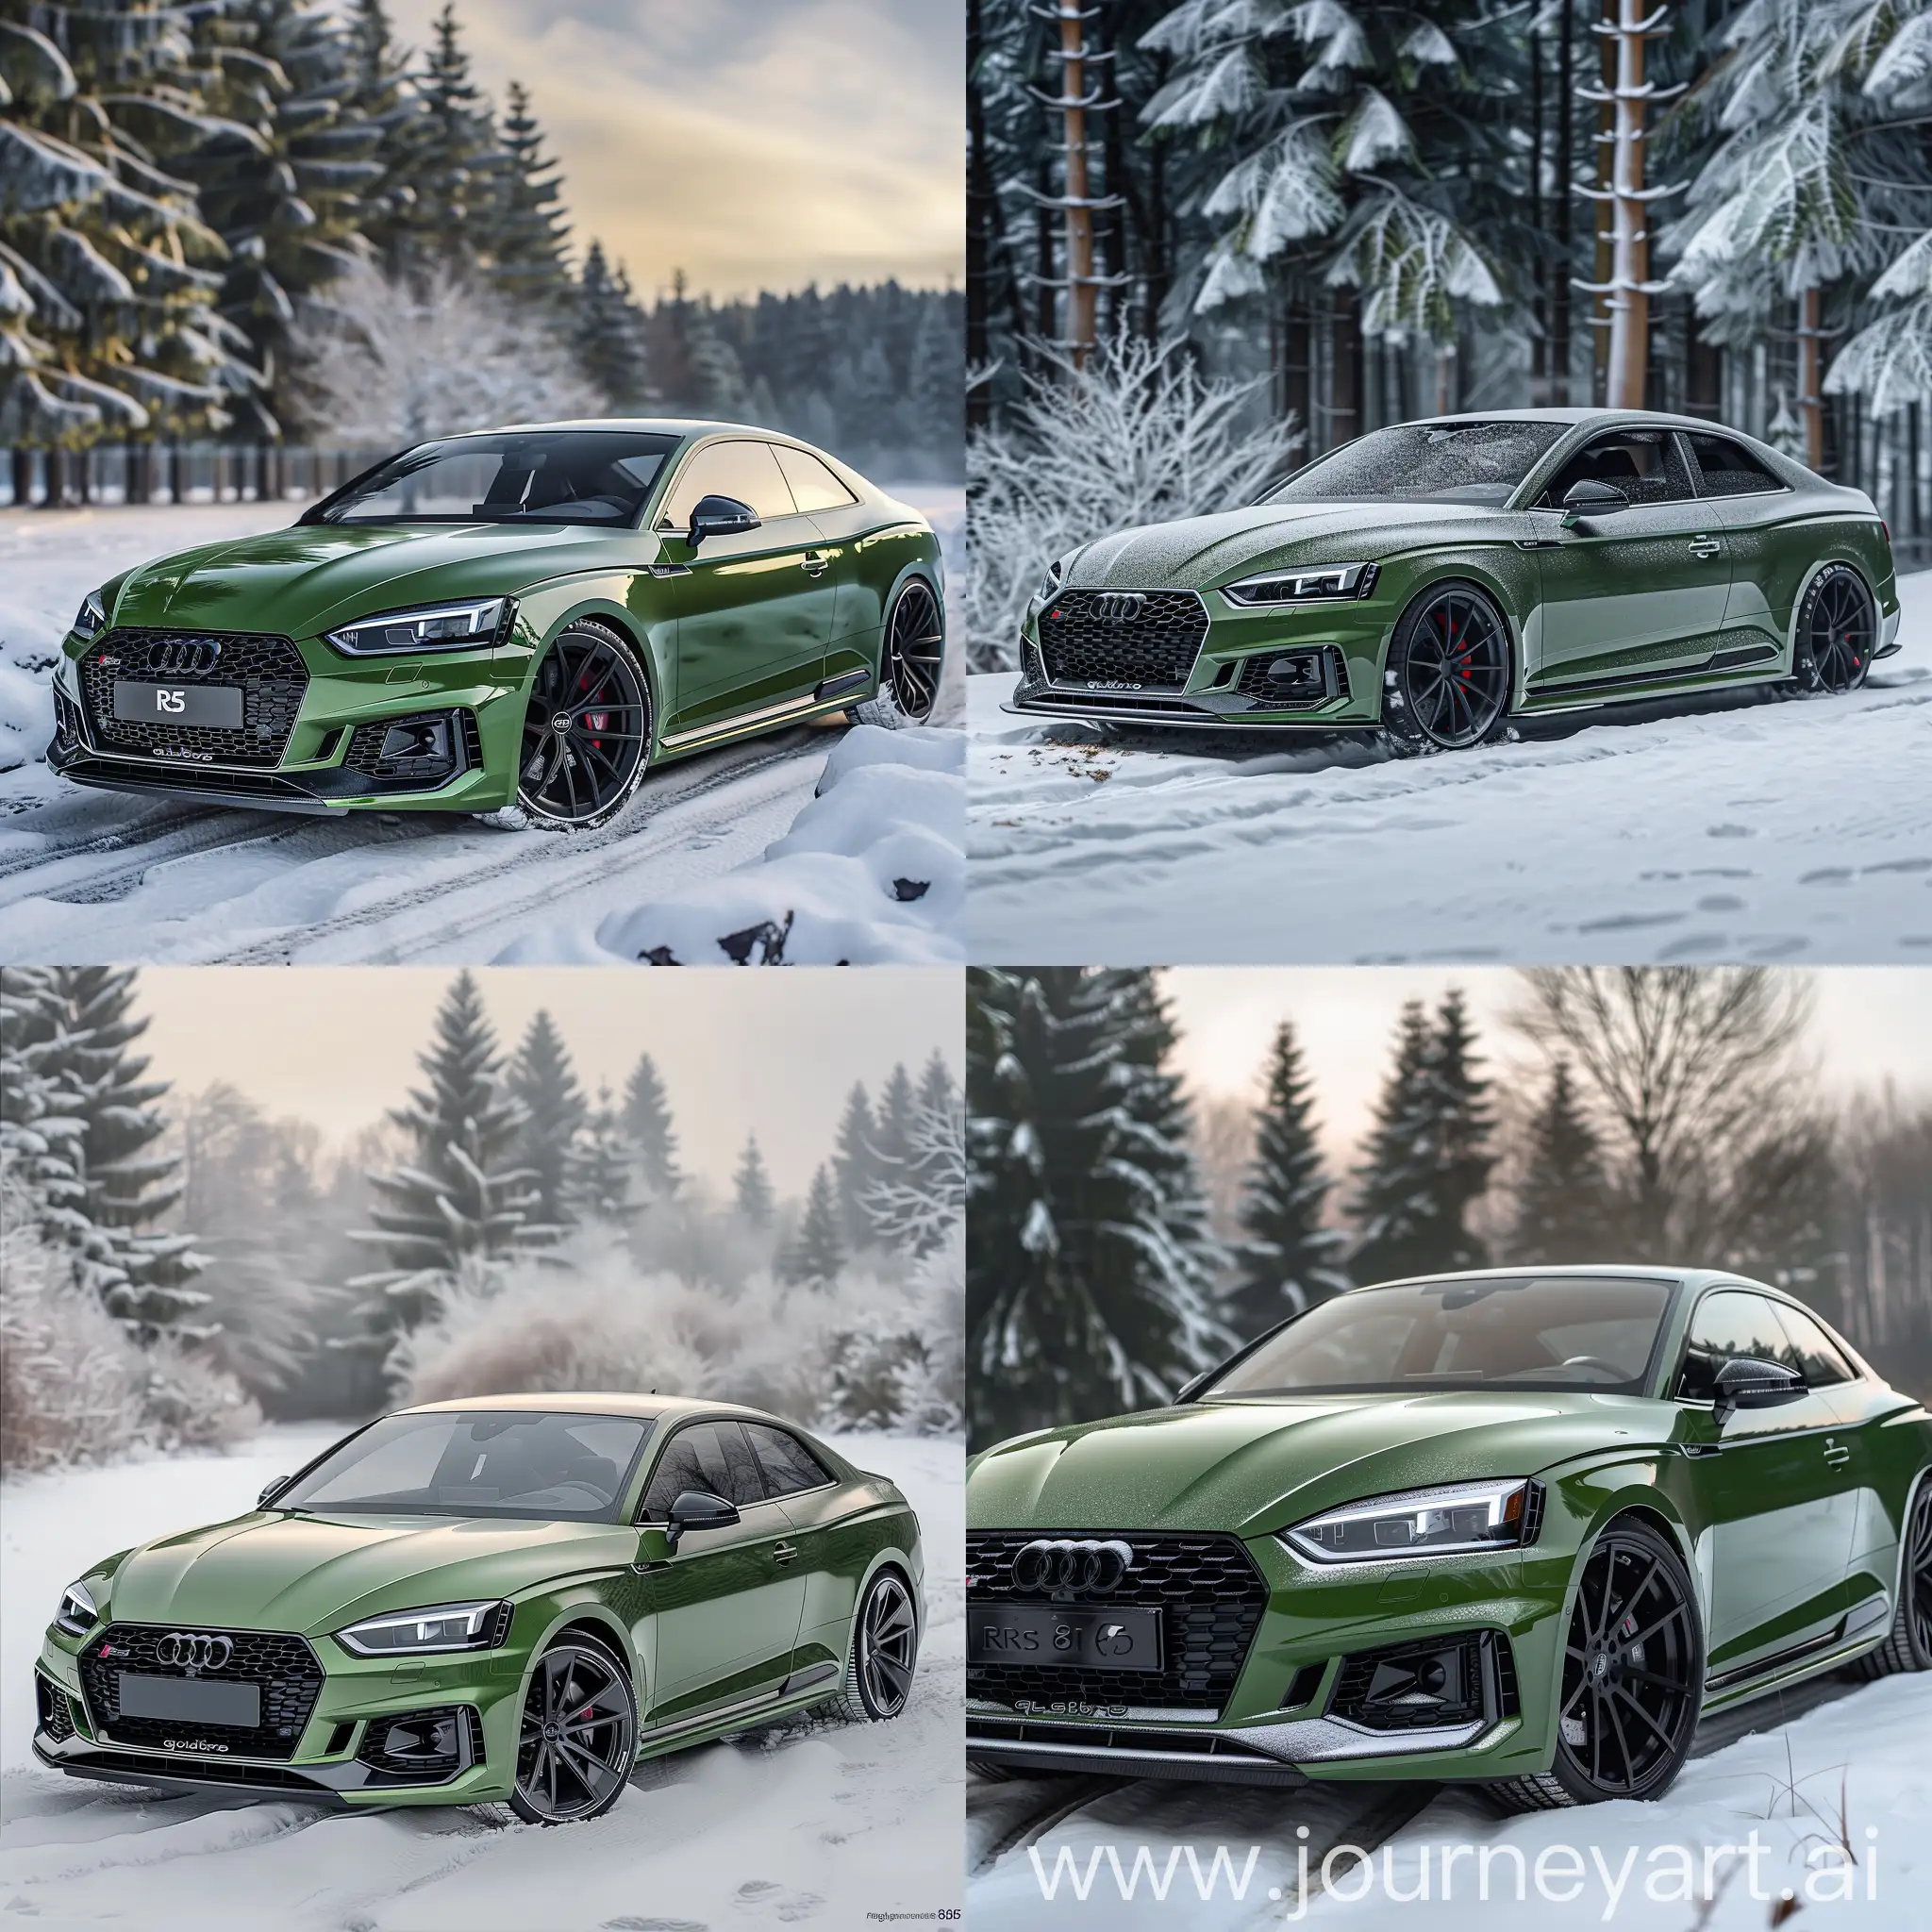 HighResolution-Audi-RS5-2018-in-Python-Green-Mat-with-Black-Rims-Winter-Vibes